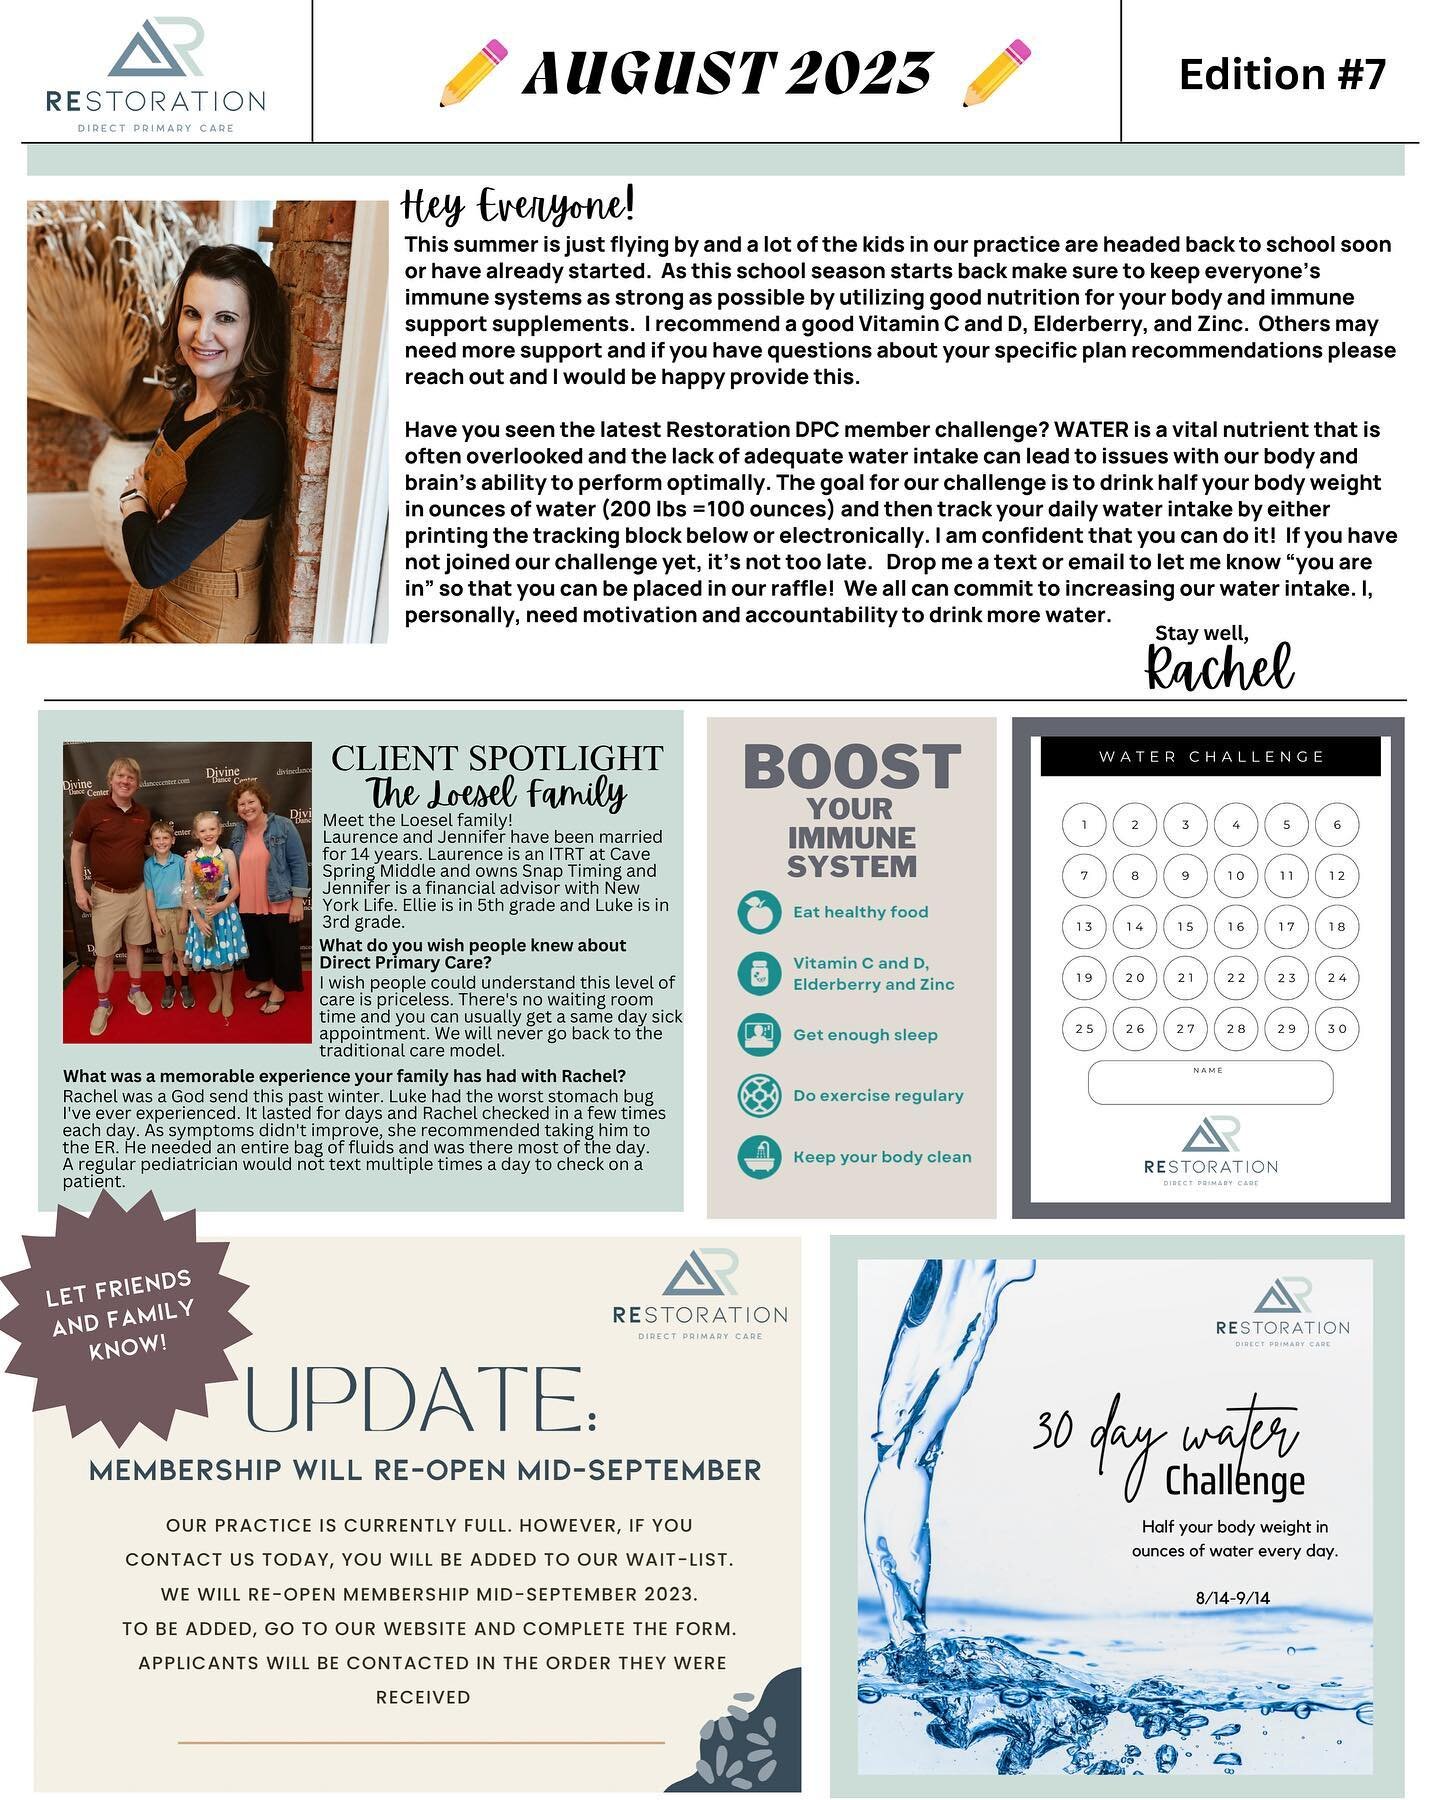 AUGUST NEWSLETTER IS HERE! 🎉